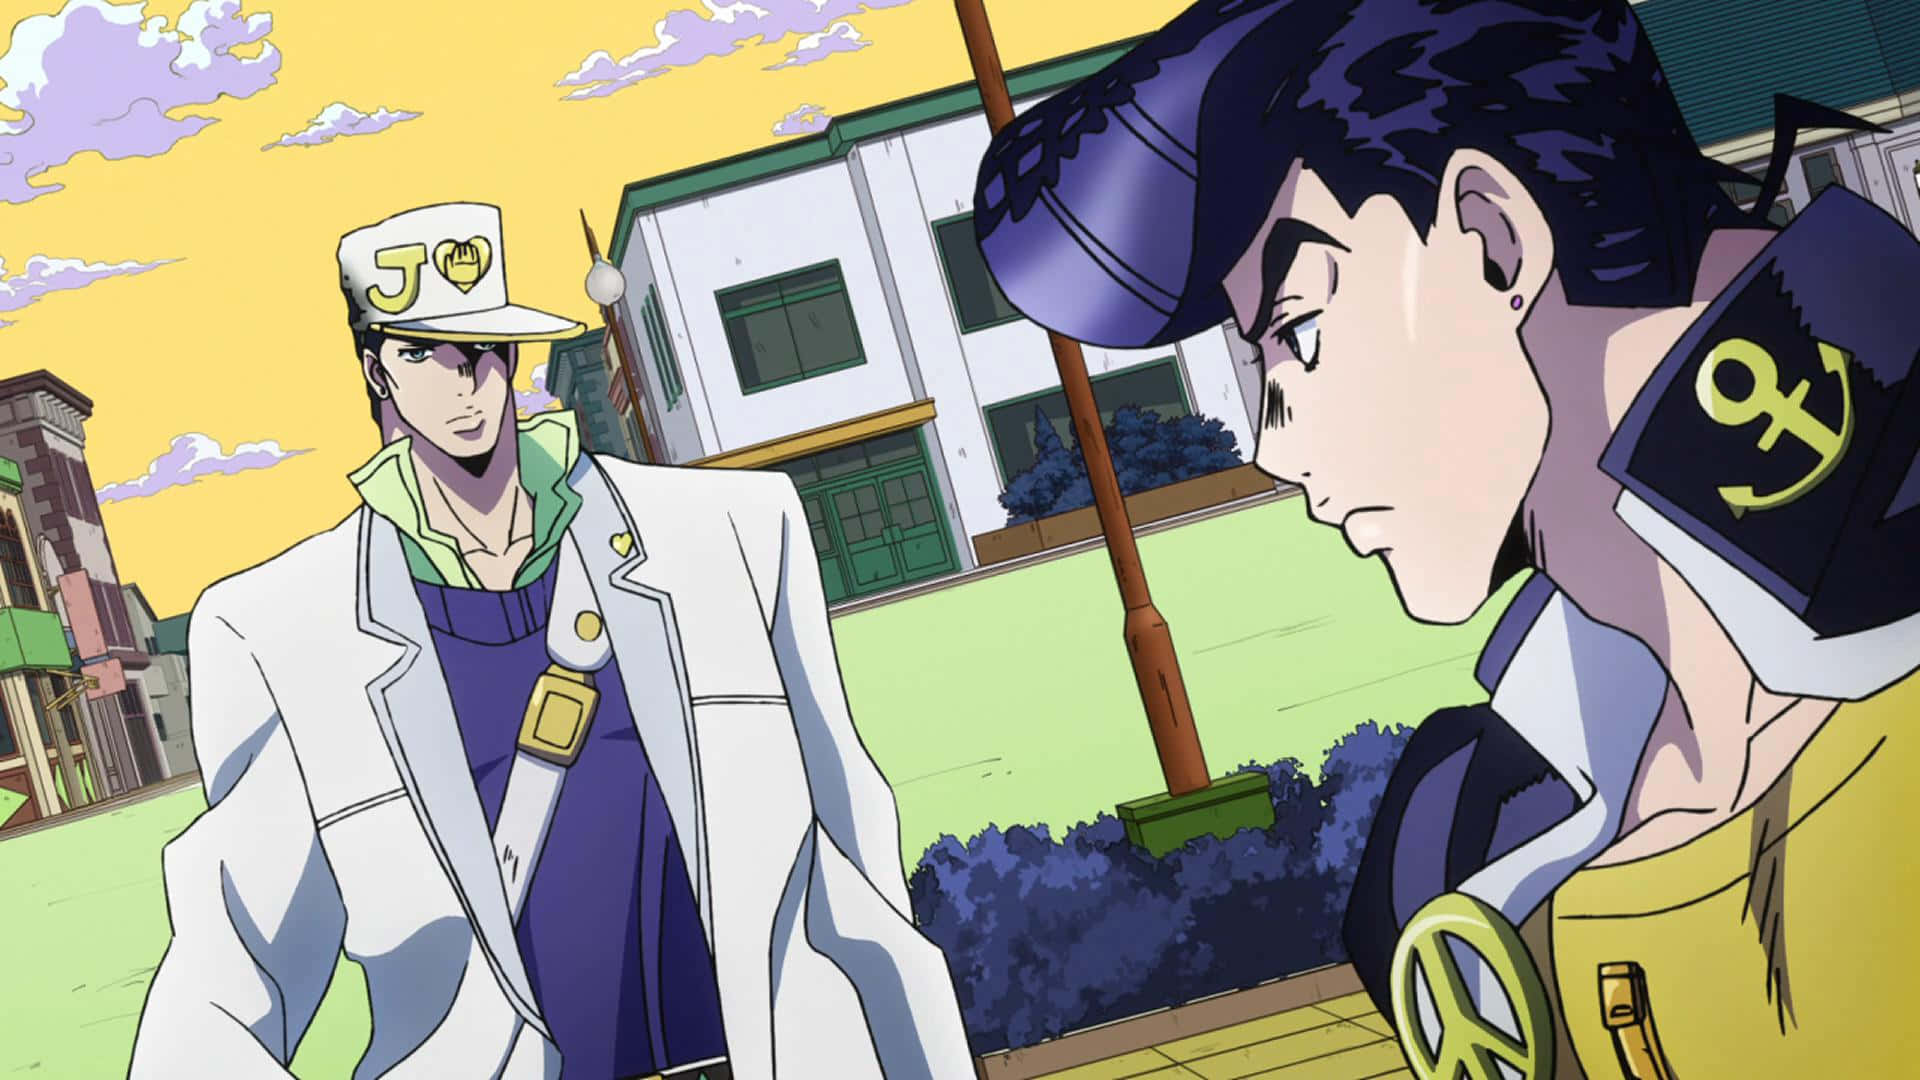 Jotaro stands tall as a formidable foe